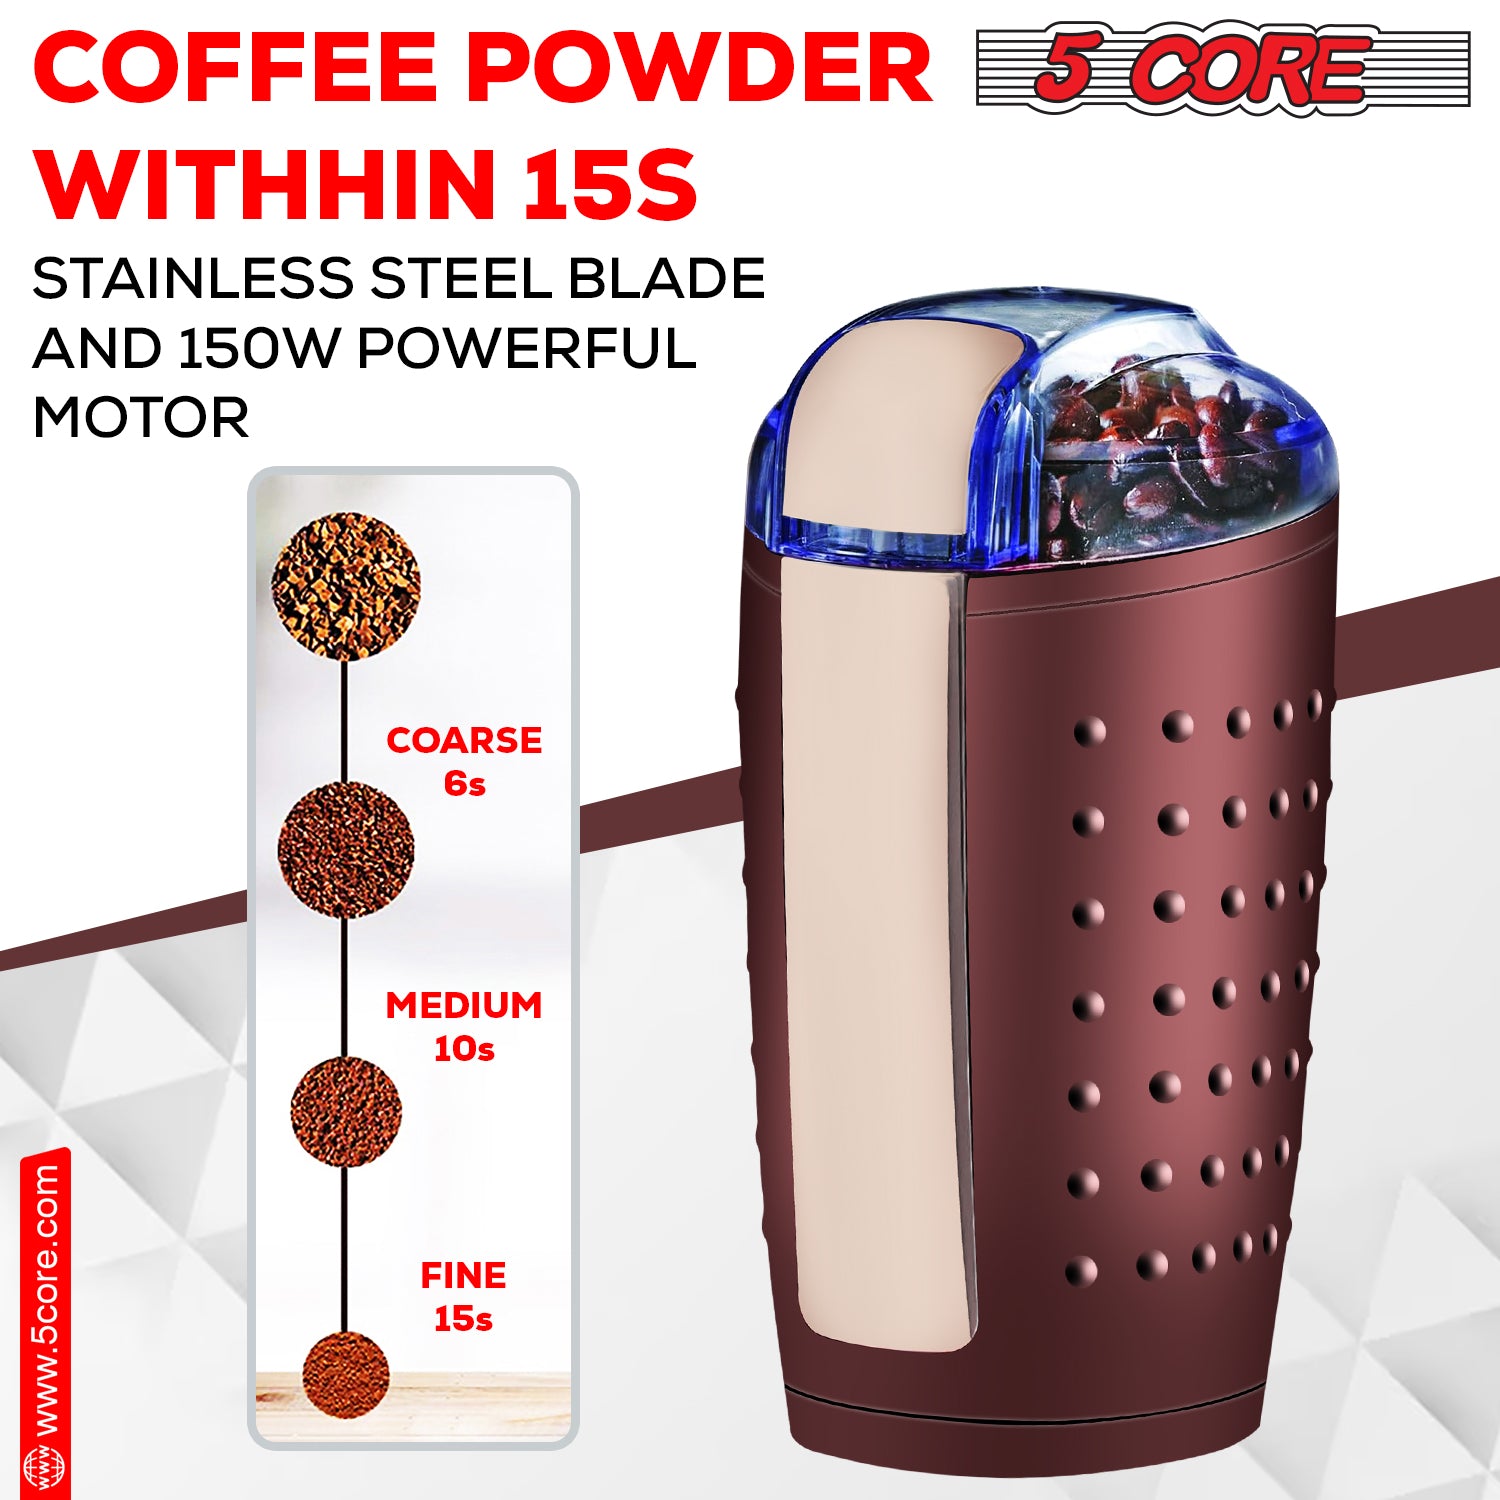 Enhance Your Morning Routine with 5 Core's 150W Coffee and Spice Grinder in Elegant Brown